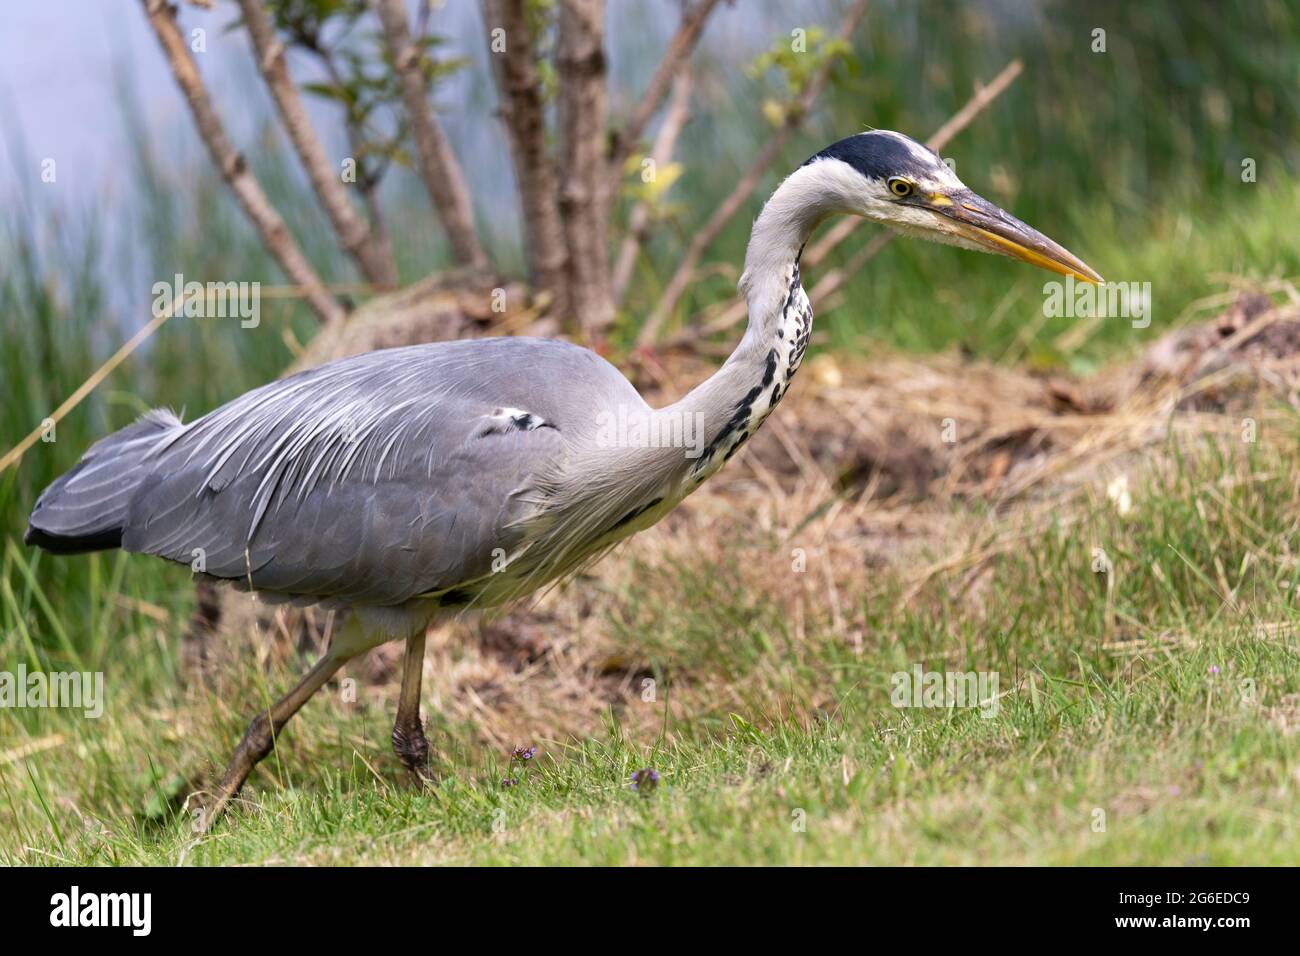 Closeup of a grey heron (Ardea cinerea, from the family Ardeidae) standing still as a statue and stalking its prey in Worcestershire, England Stock Photo